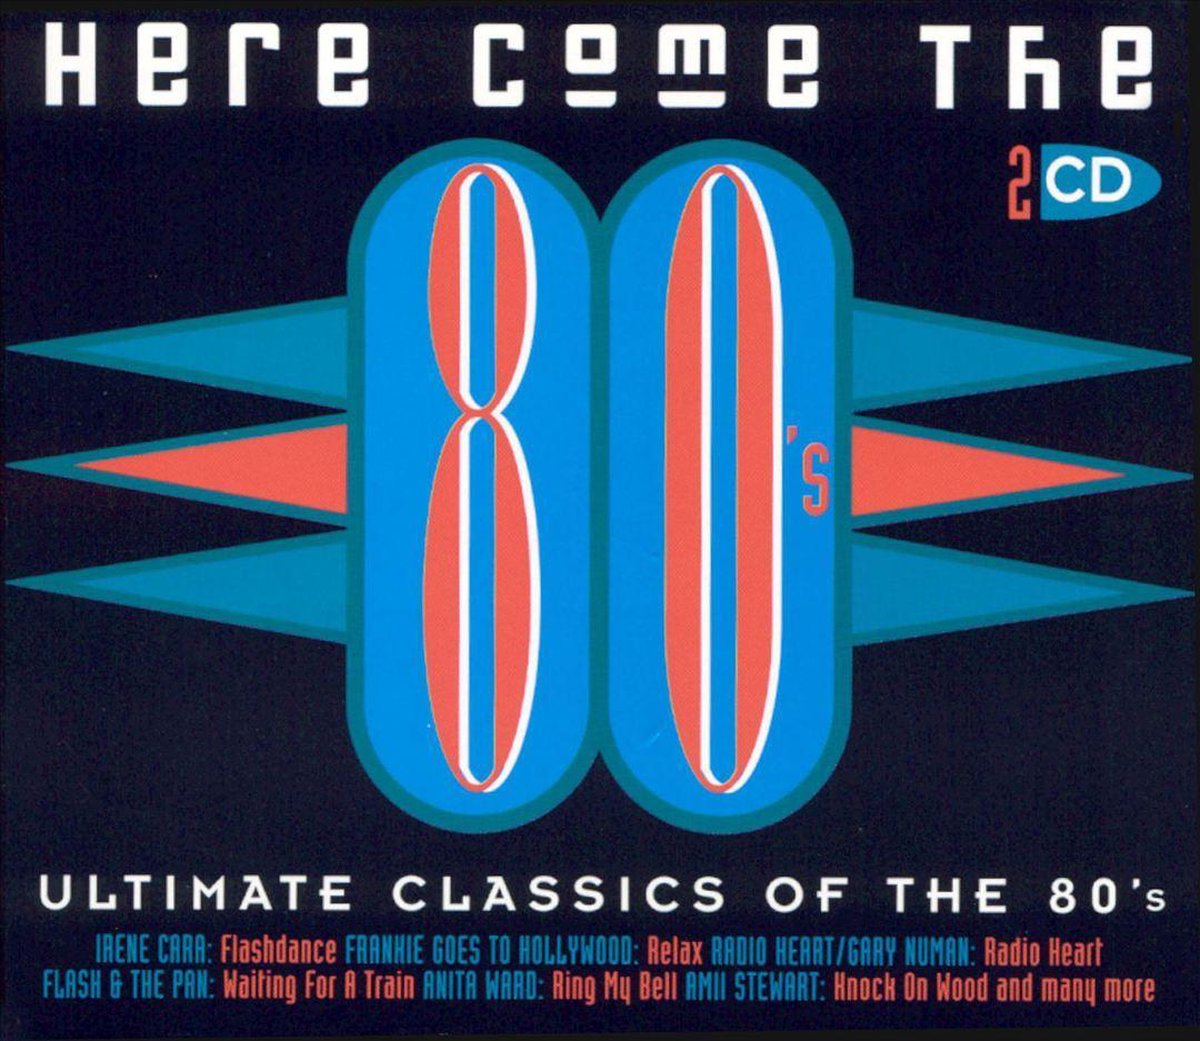 Here Come The 80's - various artists